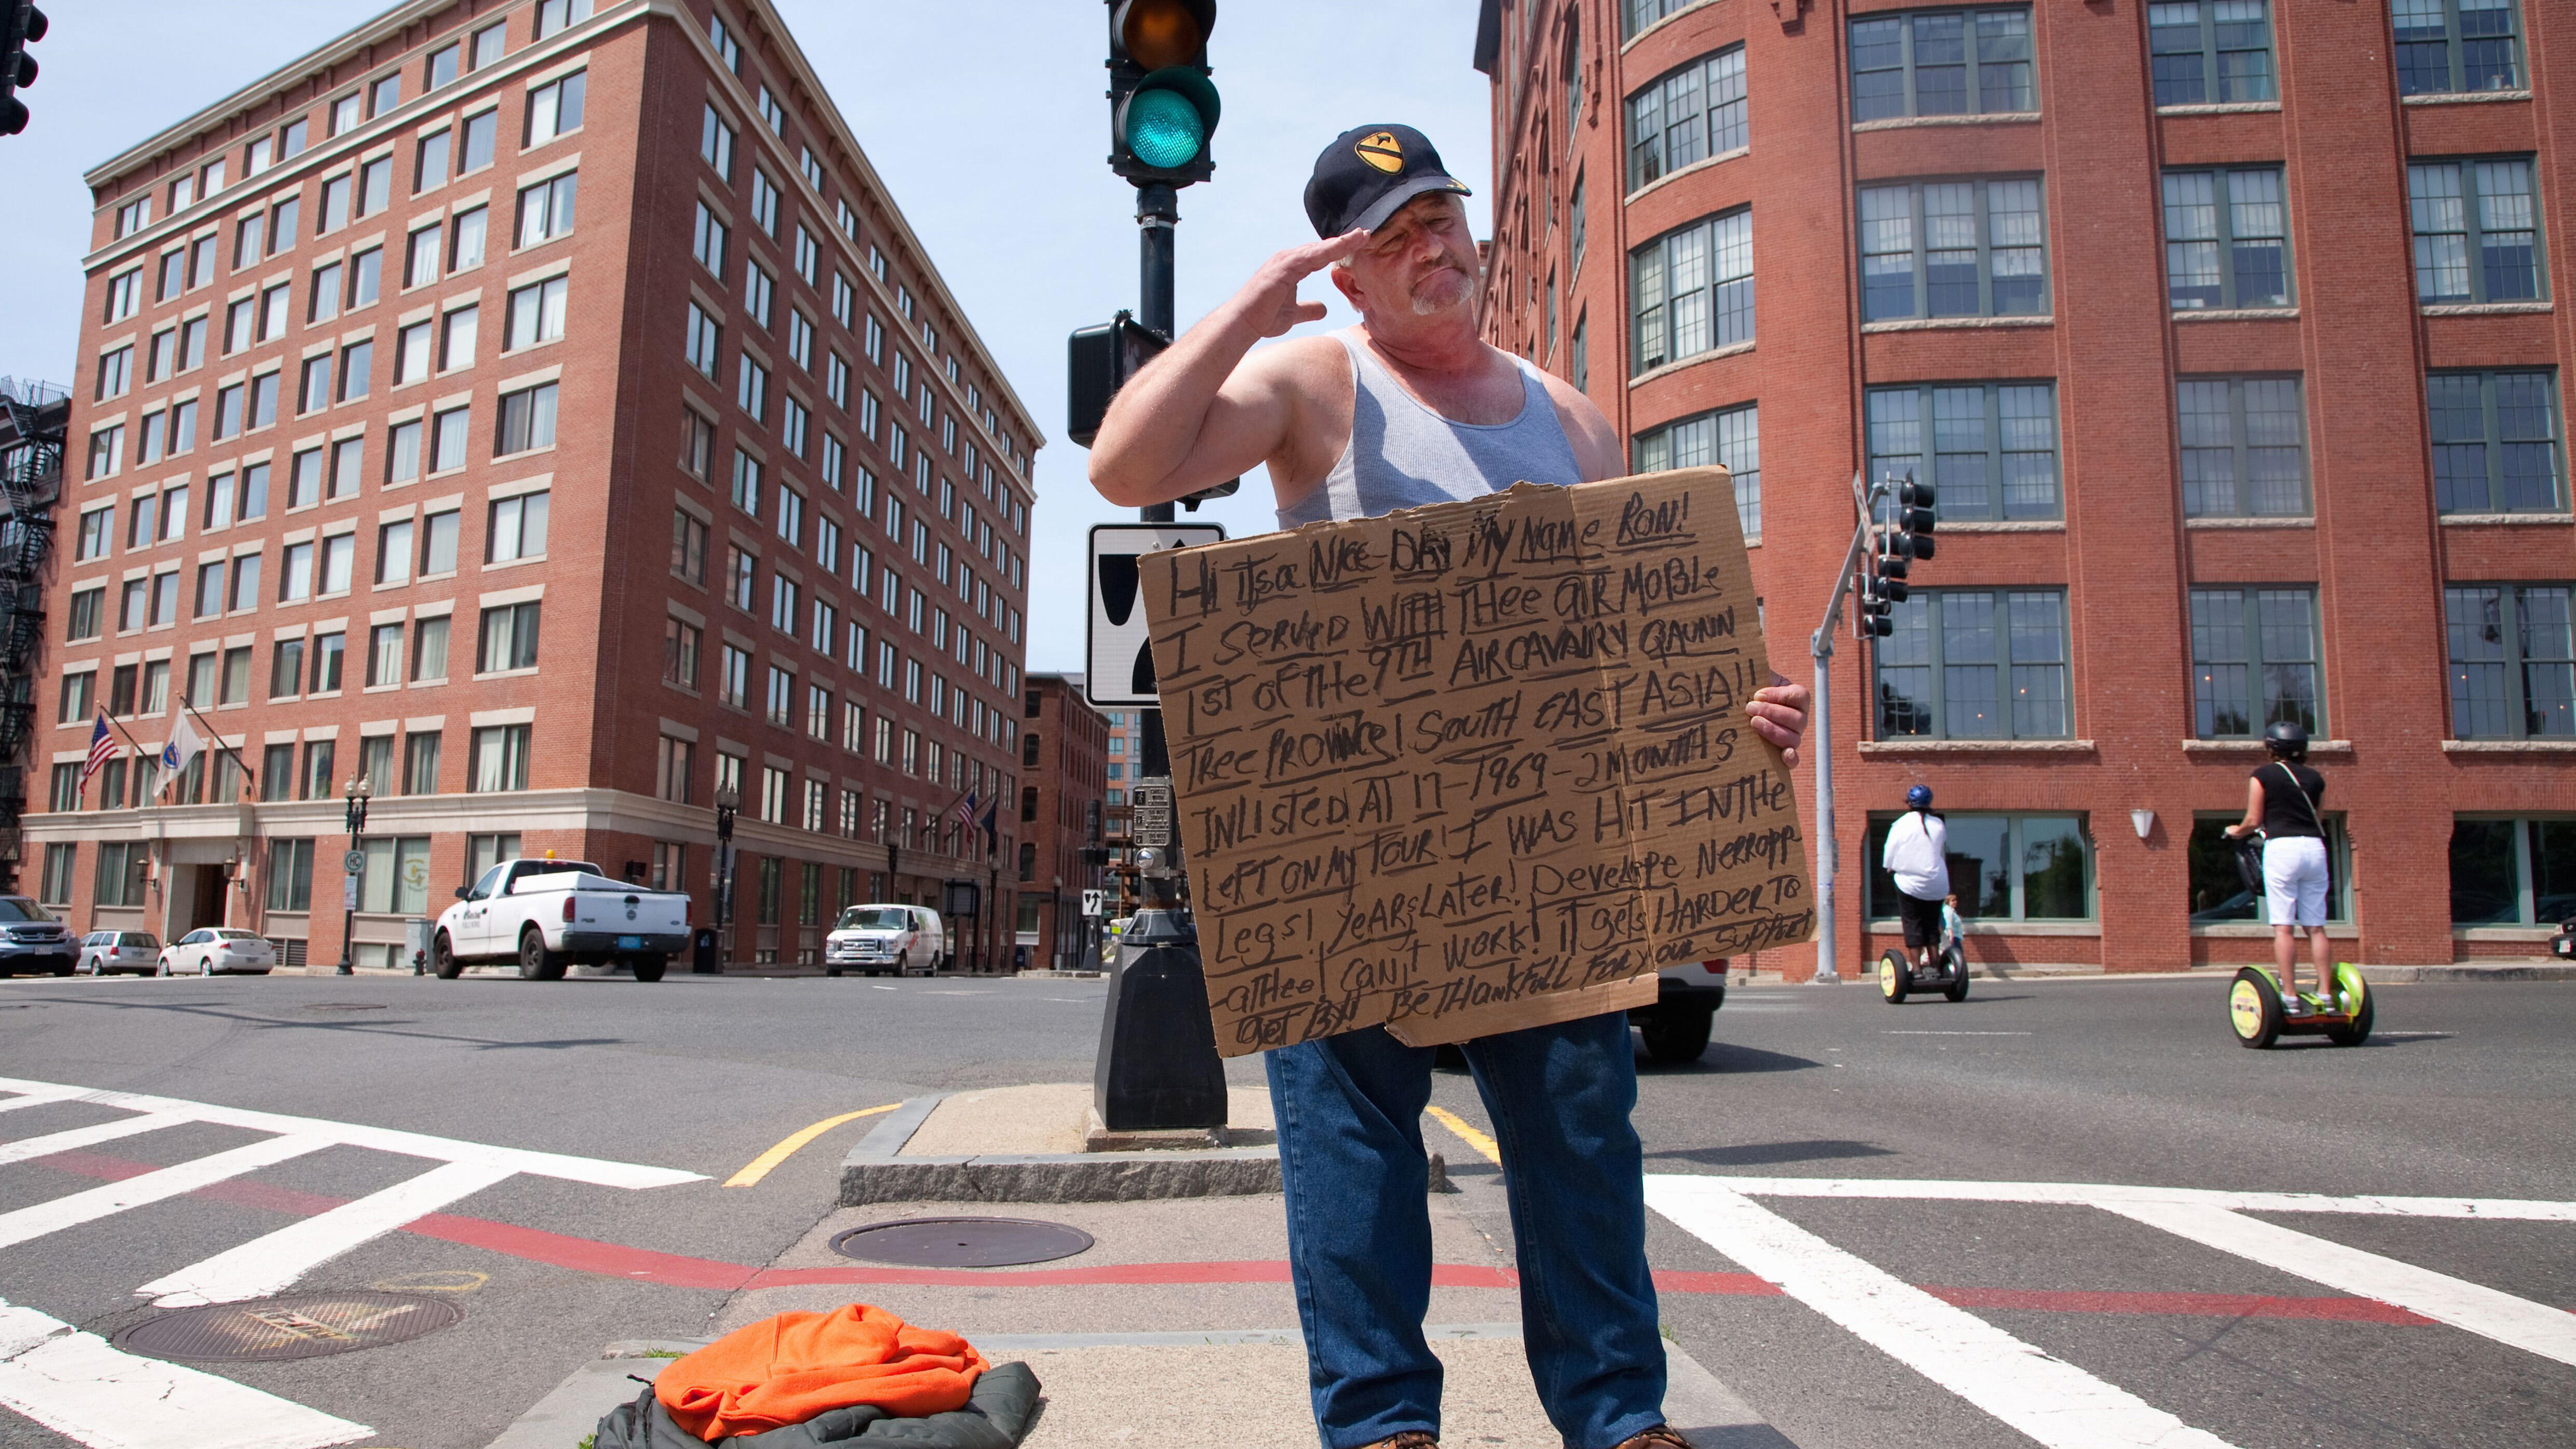 Vietnam War veteran salutes passerbys as he panhandles for money on streets of Boston, MA. (Photo by: VOA/UIG via Getty Images)